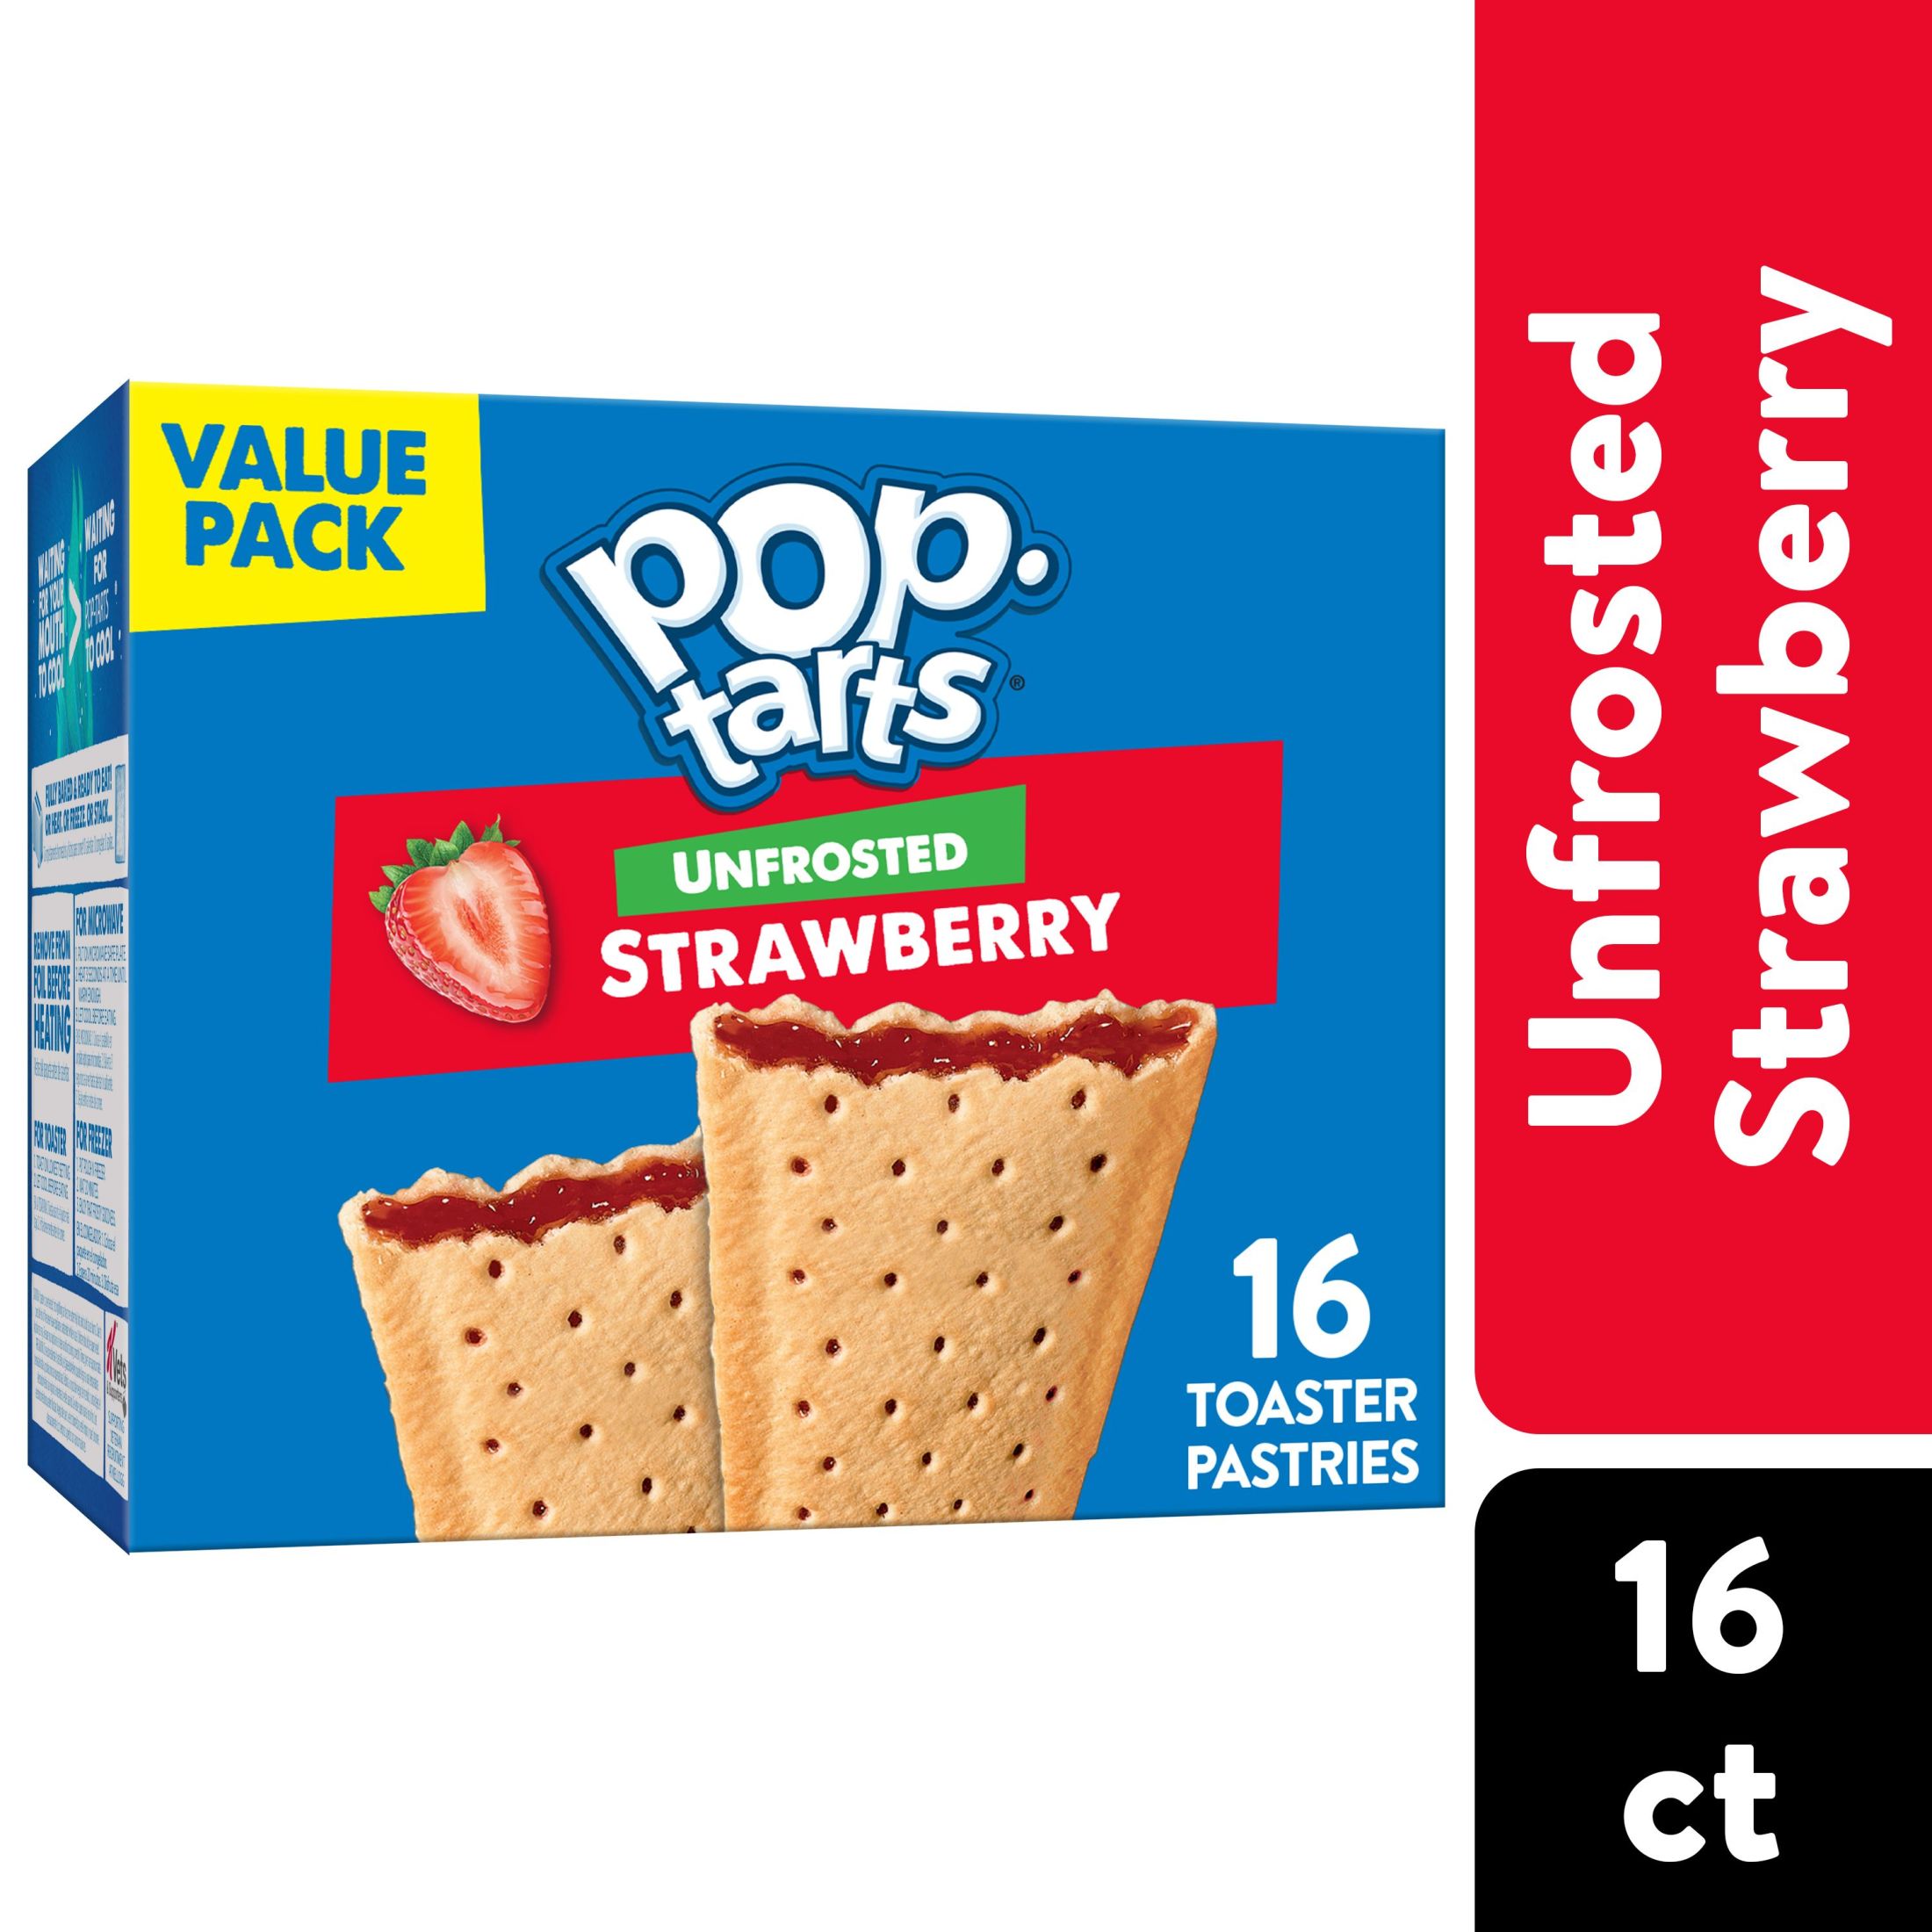 Pop-Tarts Unfrosted Strawberry Instant Breakfast Toaster Pastries, Shelf-Stable, Ready-to-Eat, 27 oz, 16 Count Box - image 1 of 15